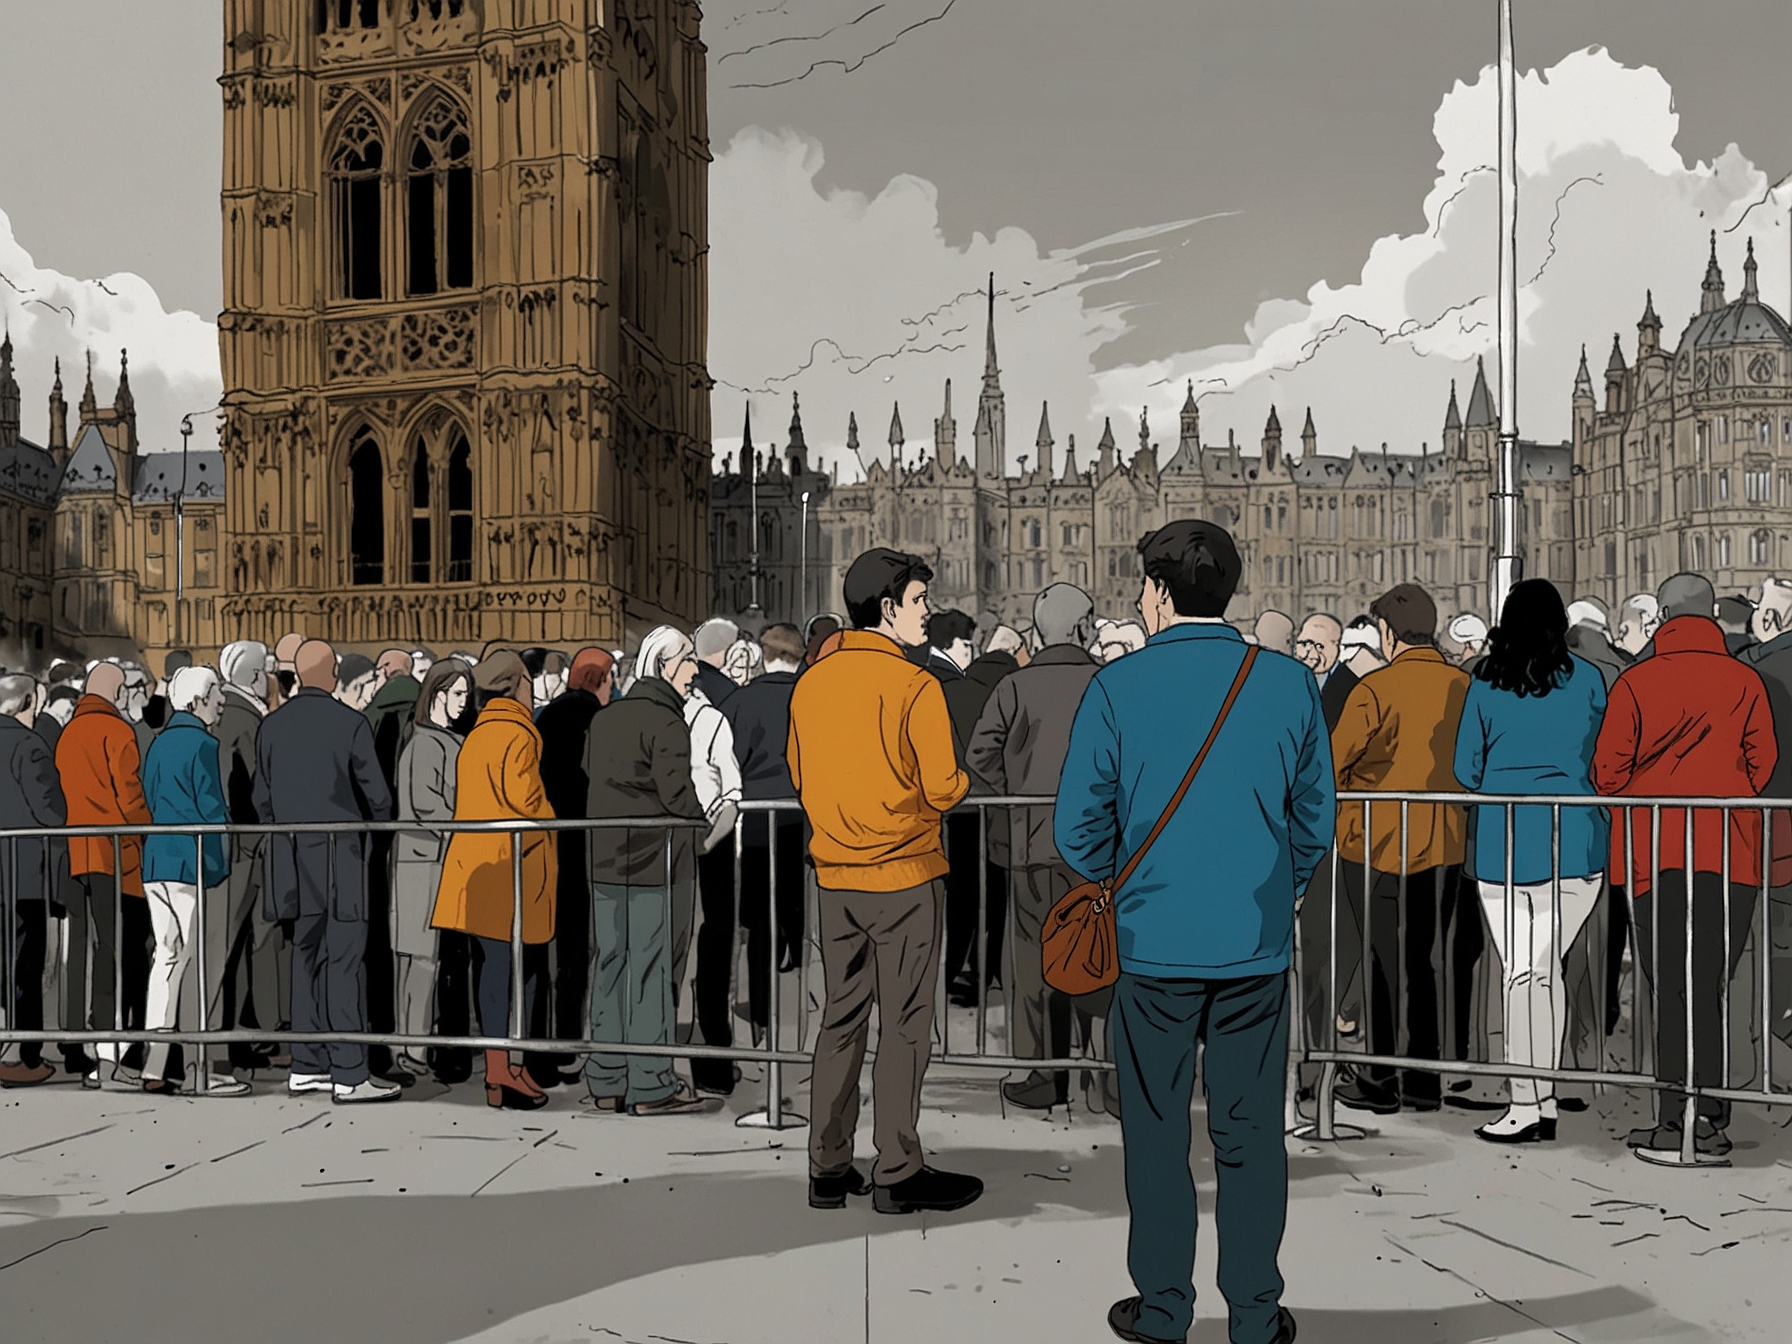 A tense moment outside the UK's Parliament as media and onlookers react to the unfolding election betting scandal. The public and media scrutiny add pressure on Rishi Sunak's political campaign.